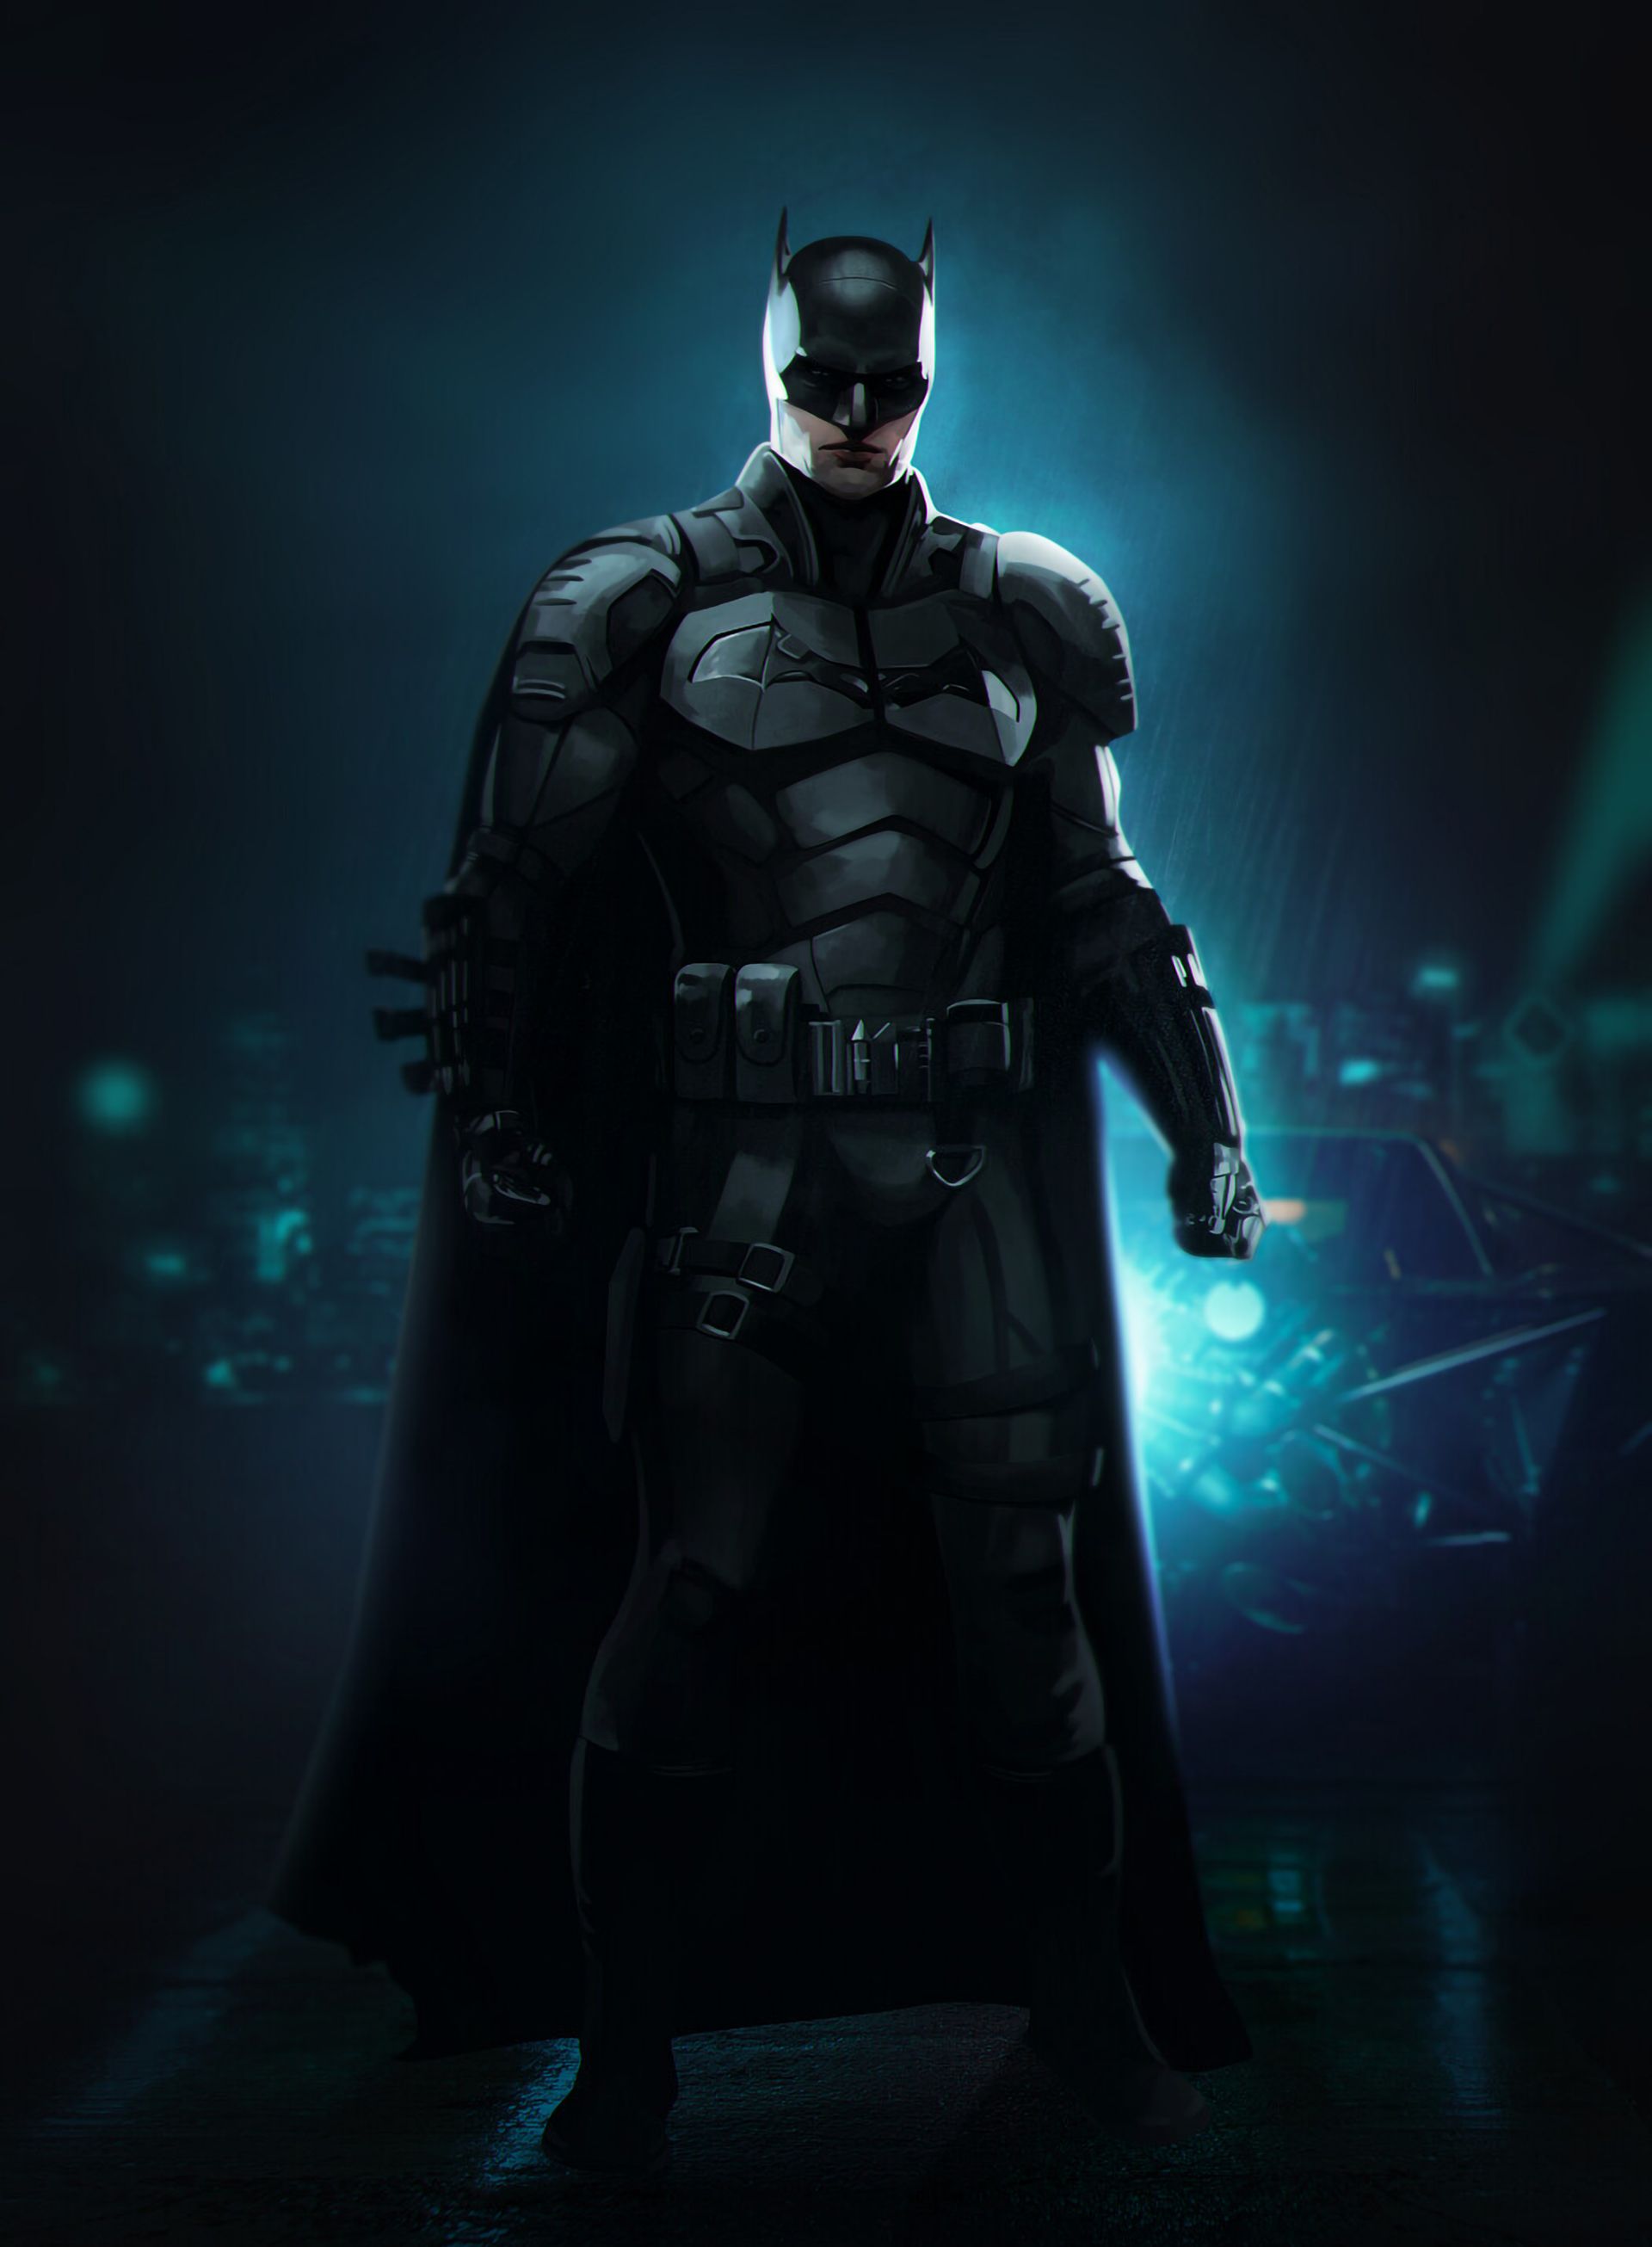 New The Batman 2021 Wallpaper, HD Movies 4K Wallpaper, Image, Photo and Background